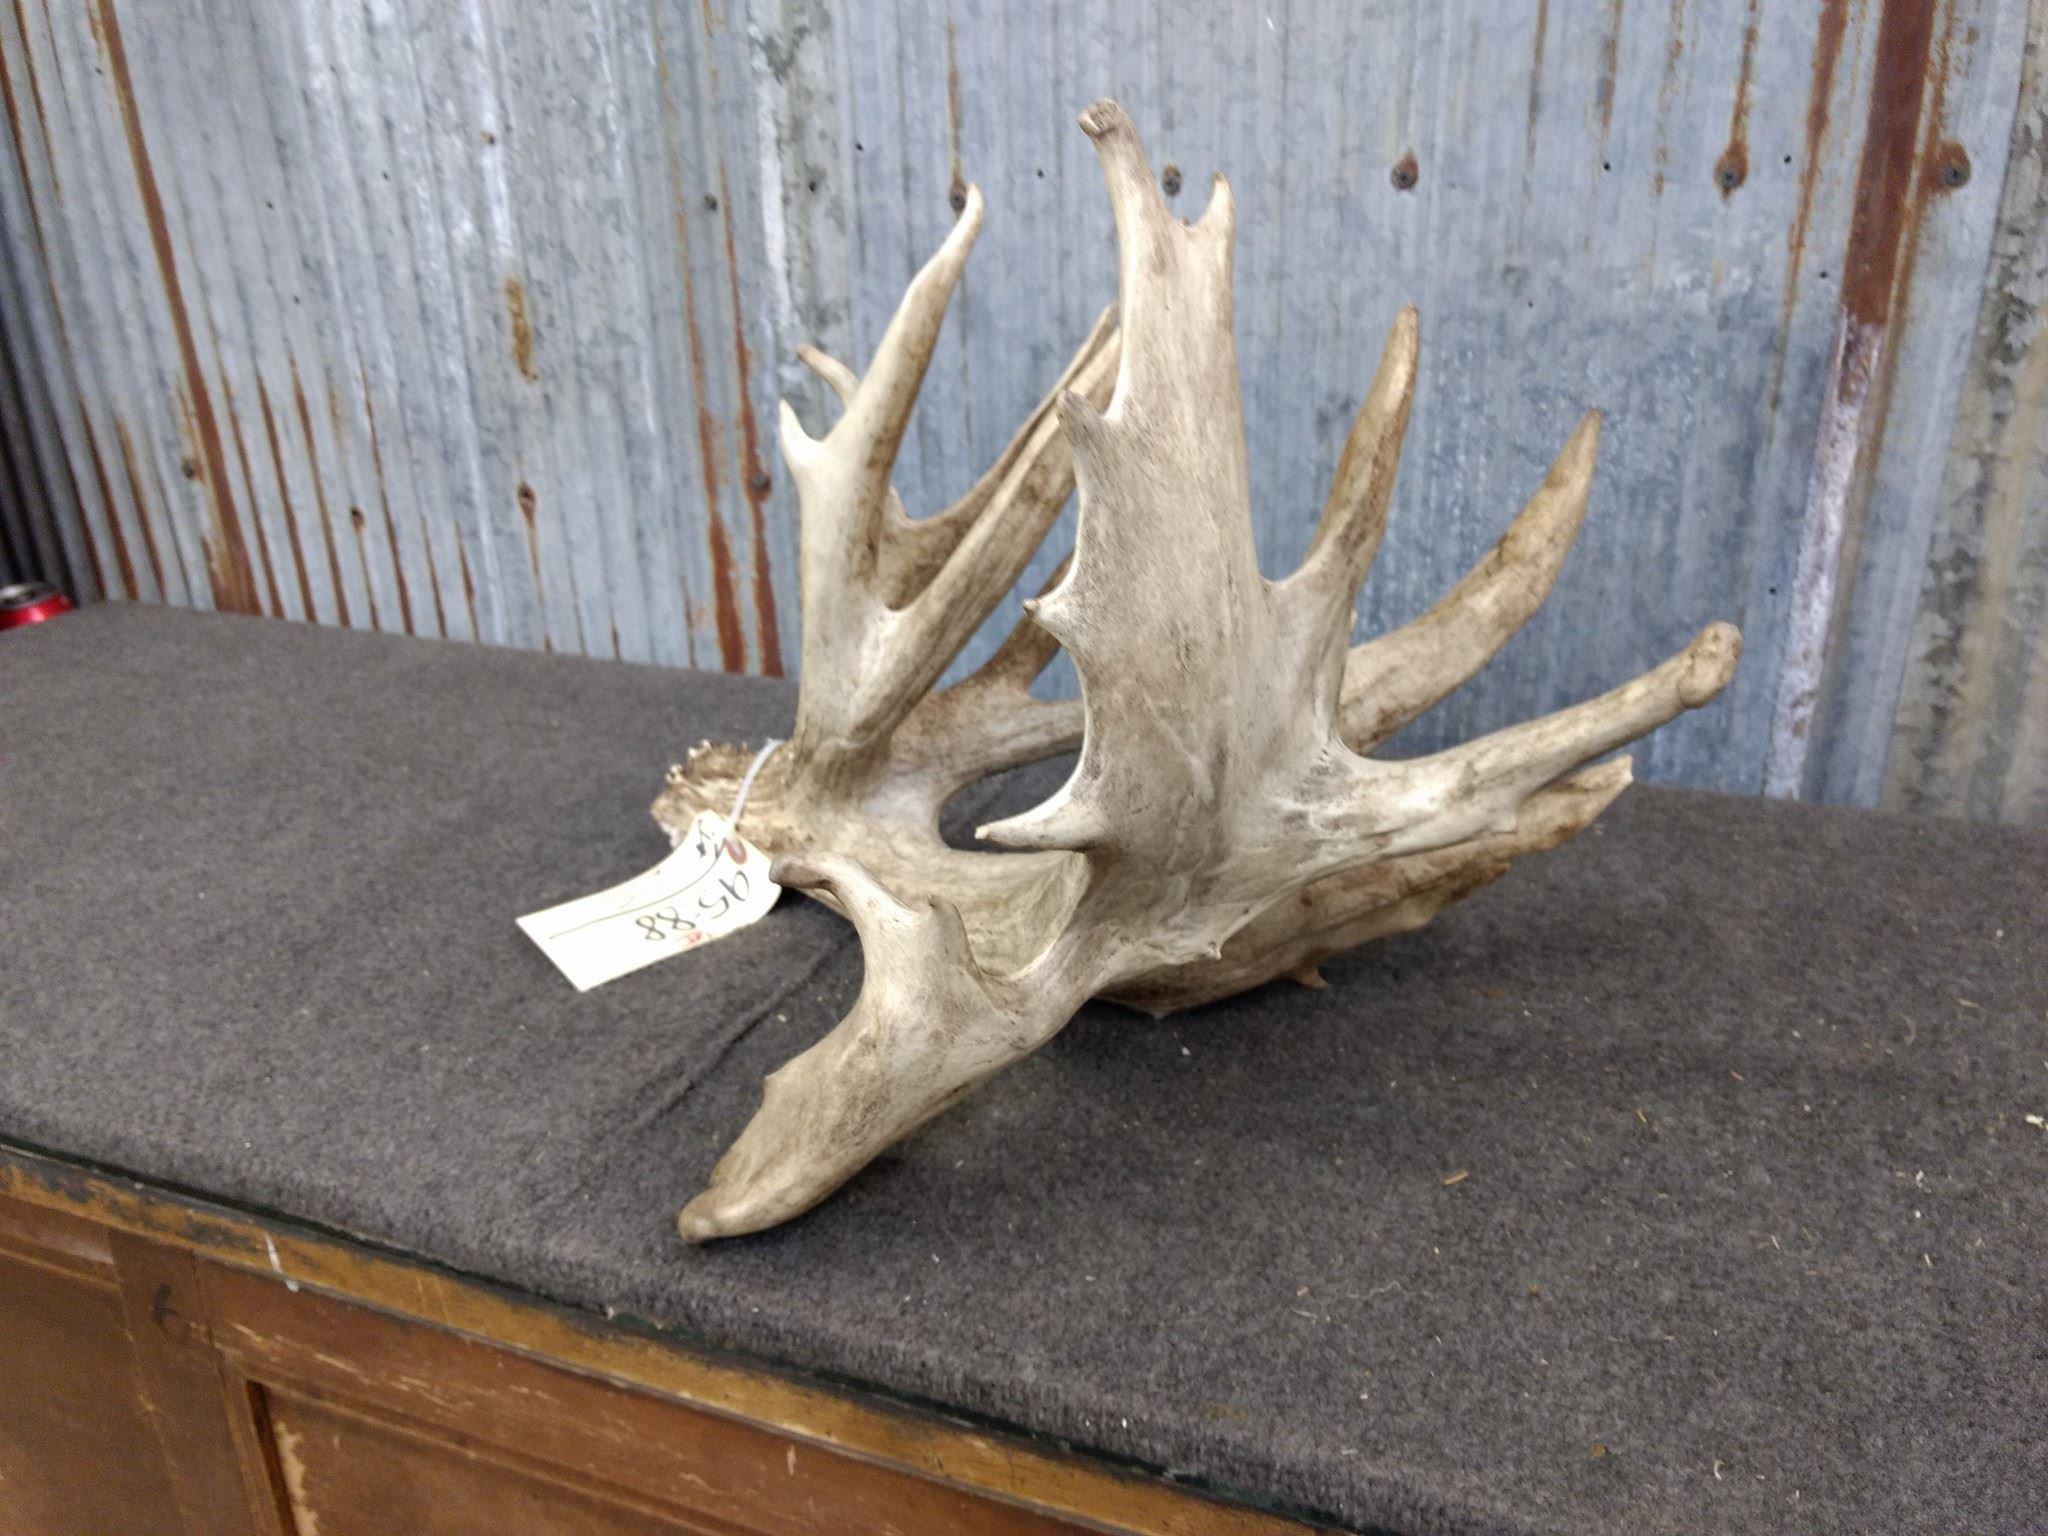 159" Cut Off Antler Turned Into A Shed By Artist Tom Sexton 5 Points Studio 